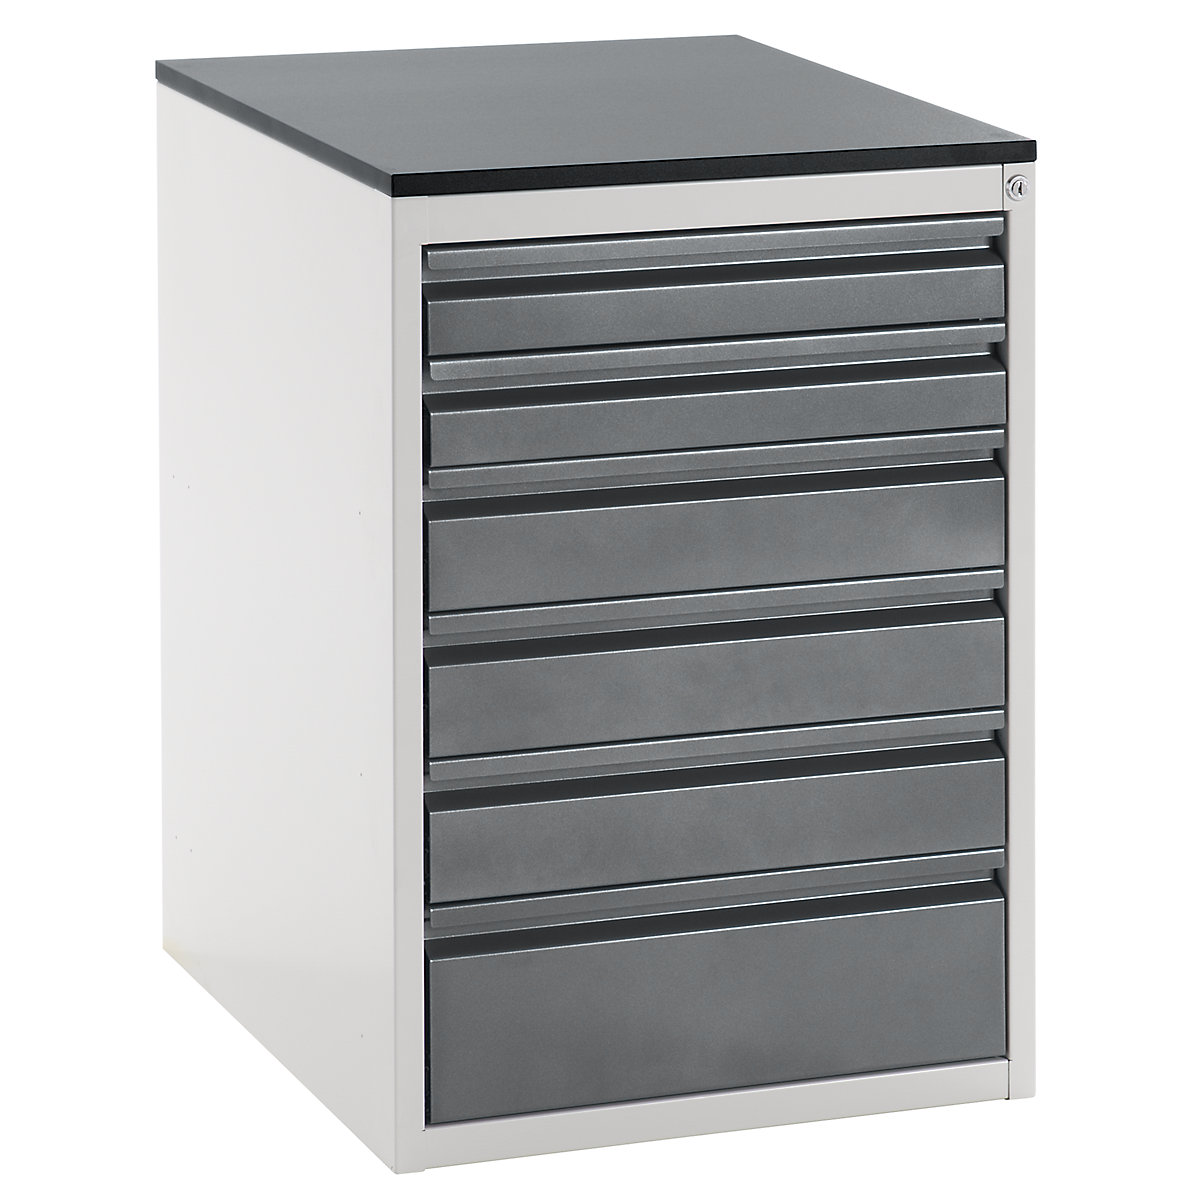 Drawer cupboard with telescopic guides – RAU, height 820 mm, drawers: 2 x 90, 3 x 120, 1 x 180 mm, light grey / metallic charcoal, width 580 mm-12